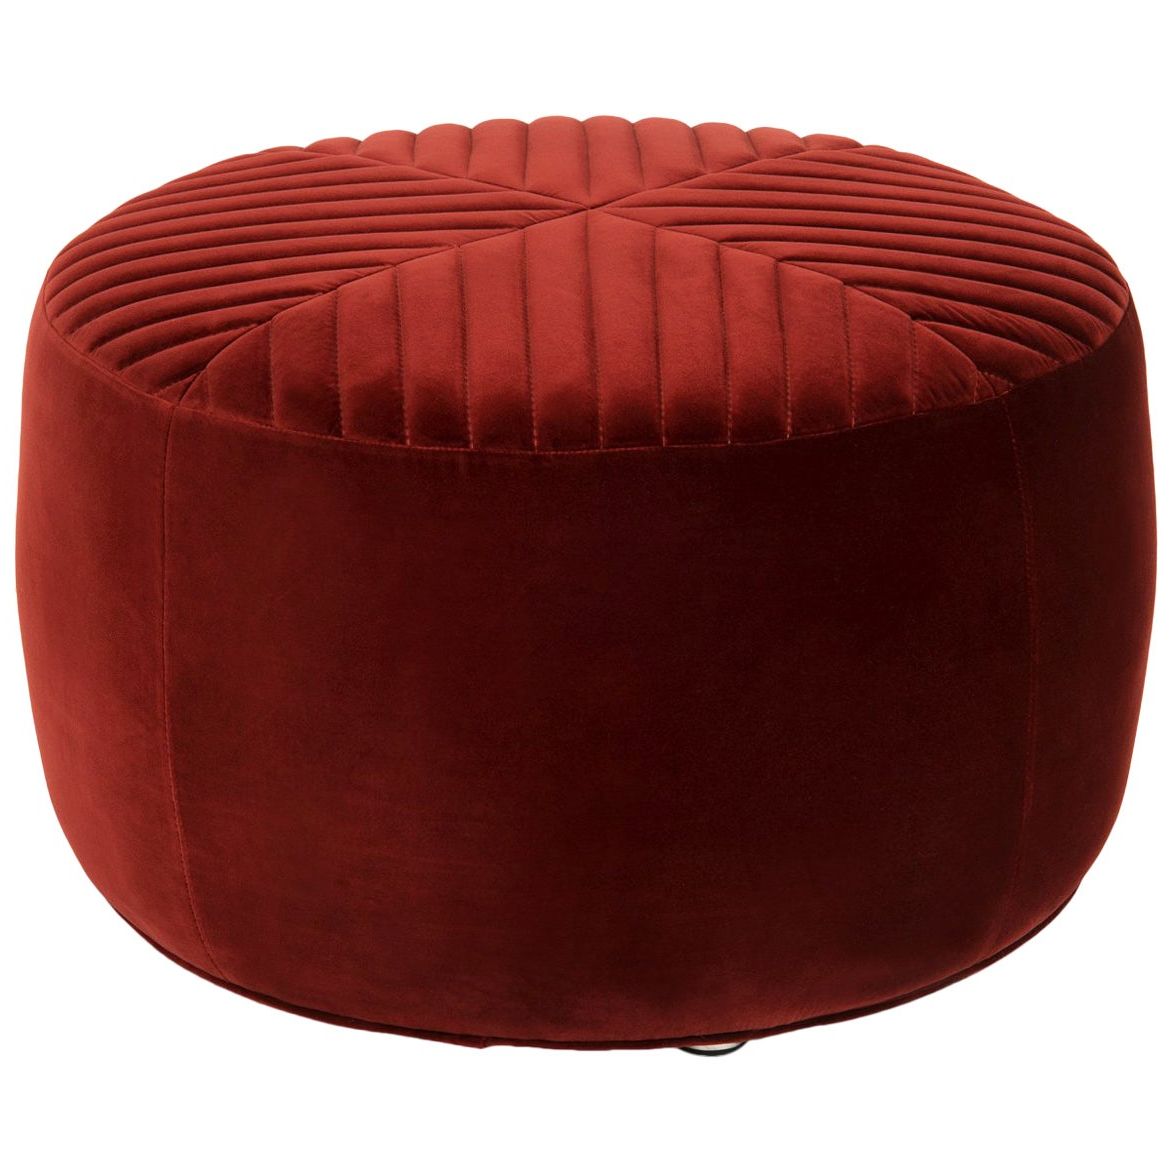 Textured Blush Round Pouf Ottomans Within Current Modern Style Round Sicily Velvet Ottoman With Chrome Feet In Blush Pink (View 7 of 10)